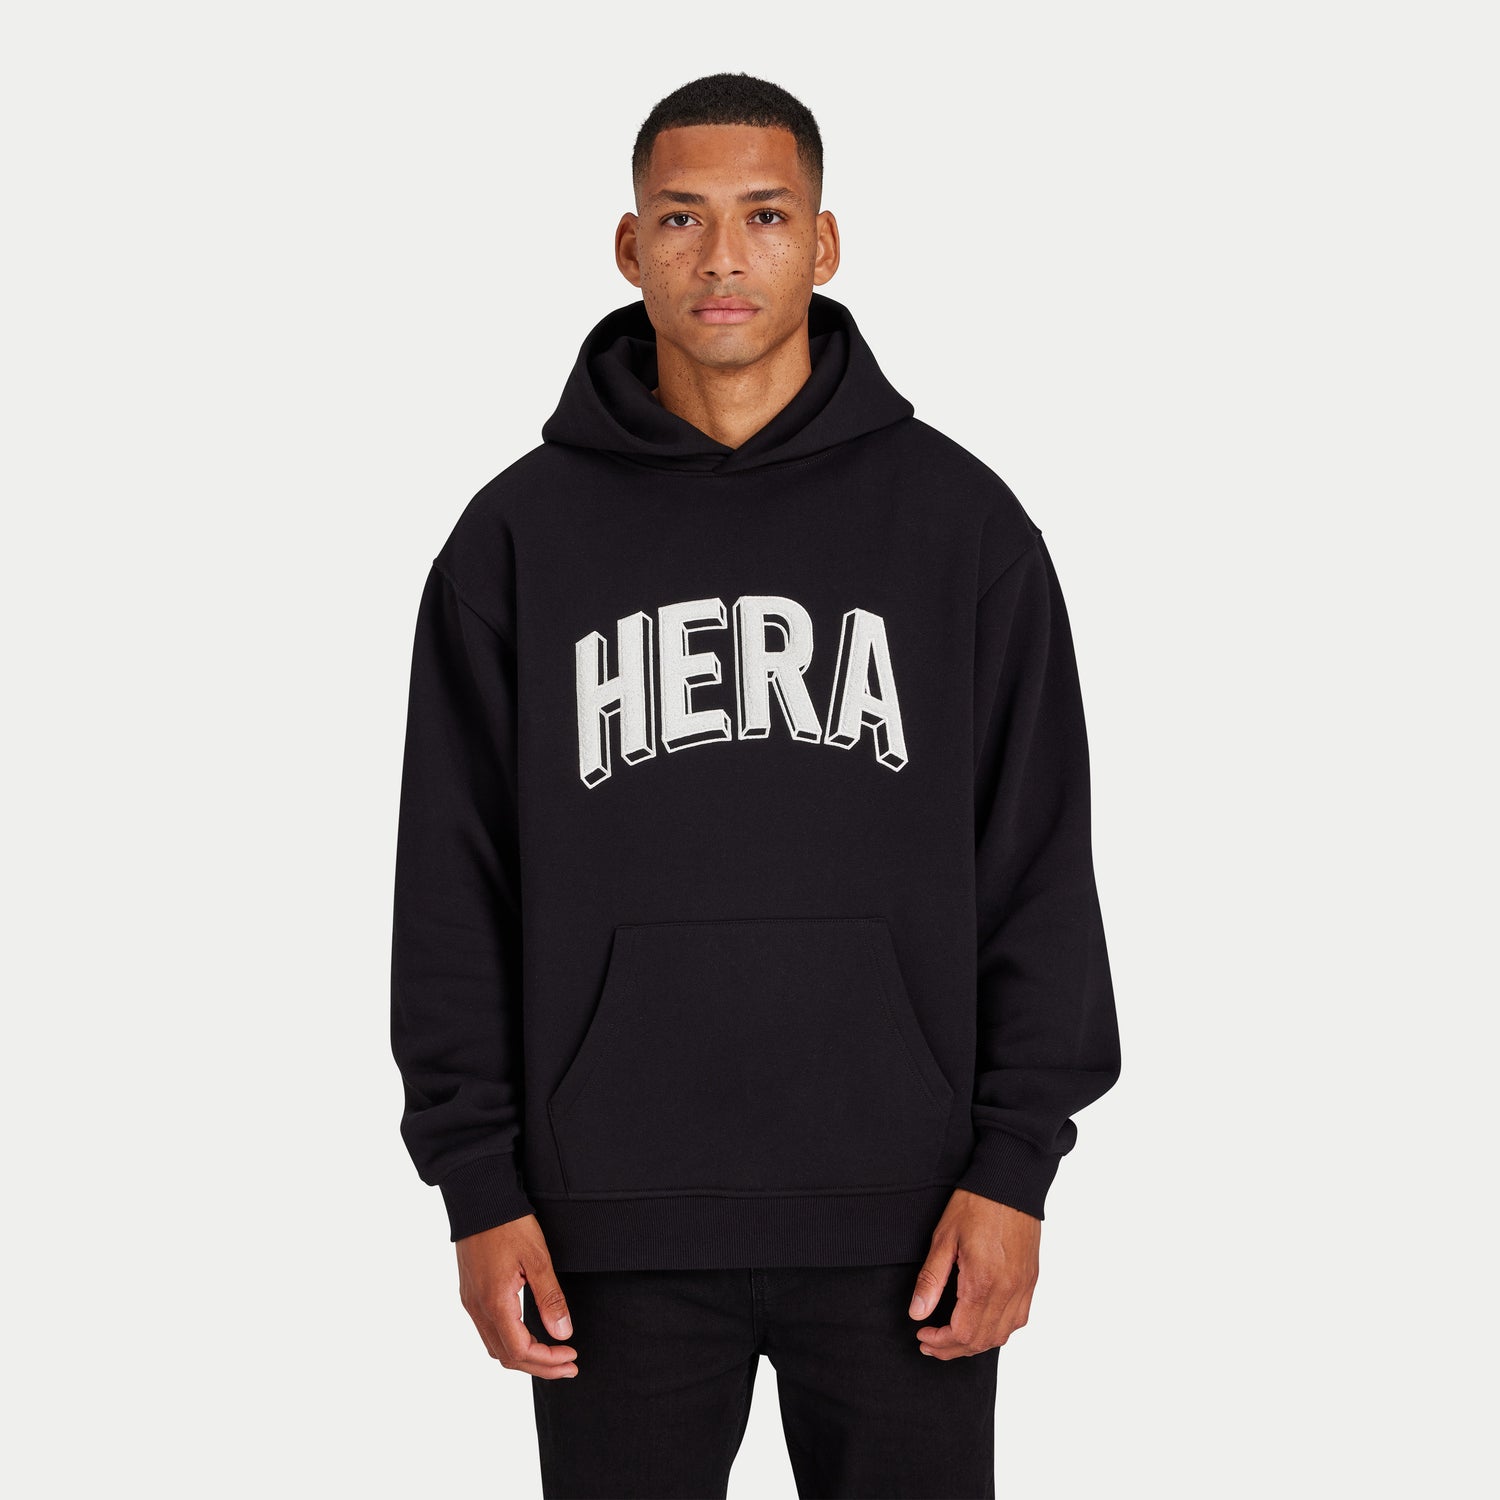 Collections – HERA Clothing